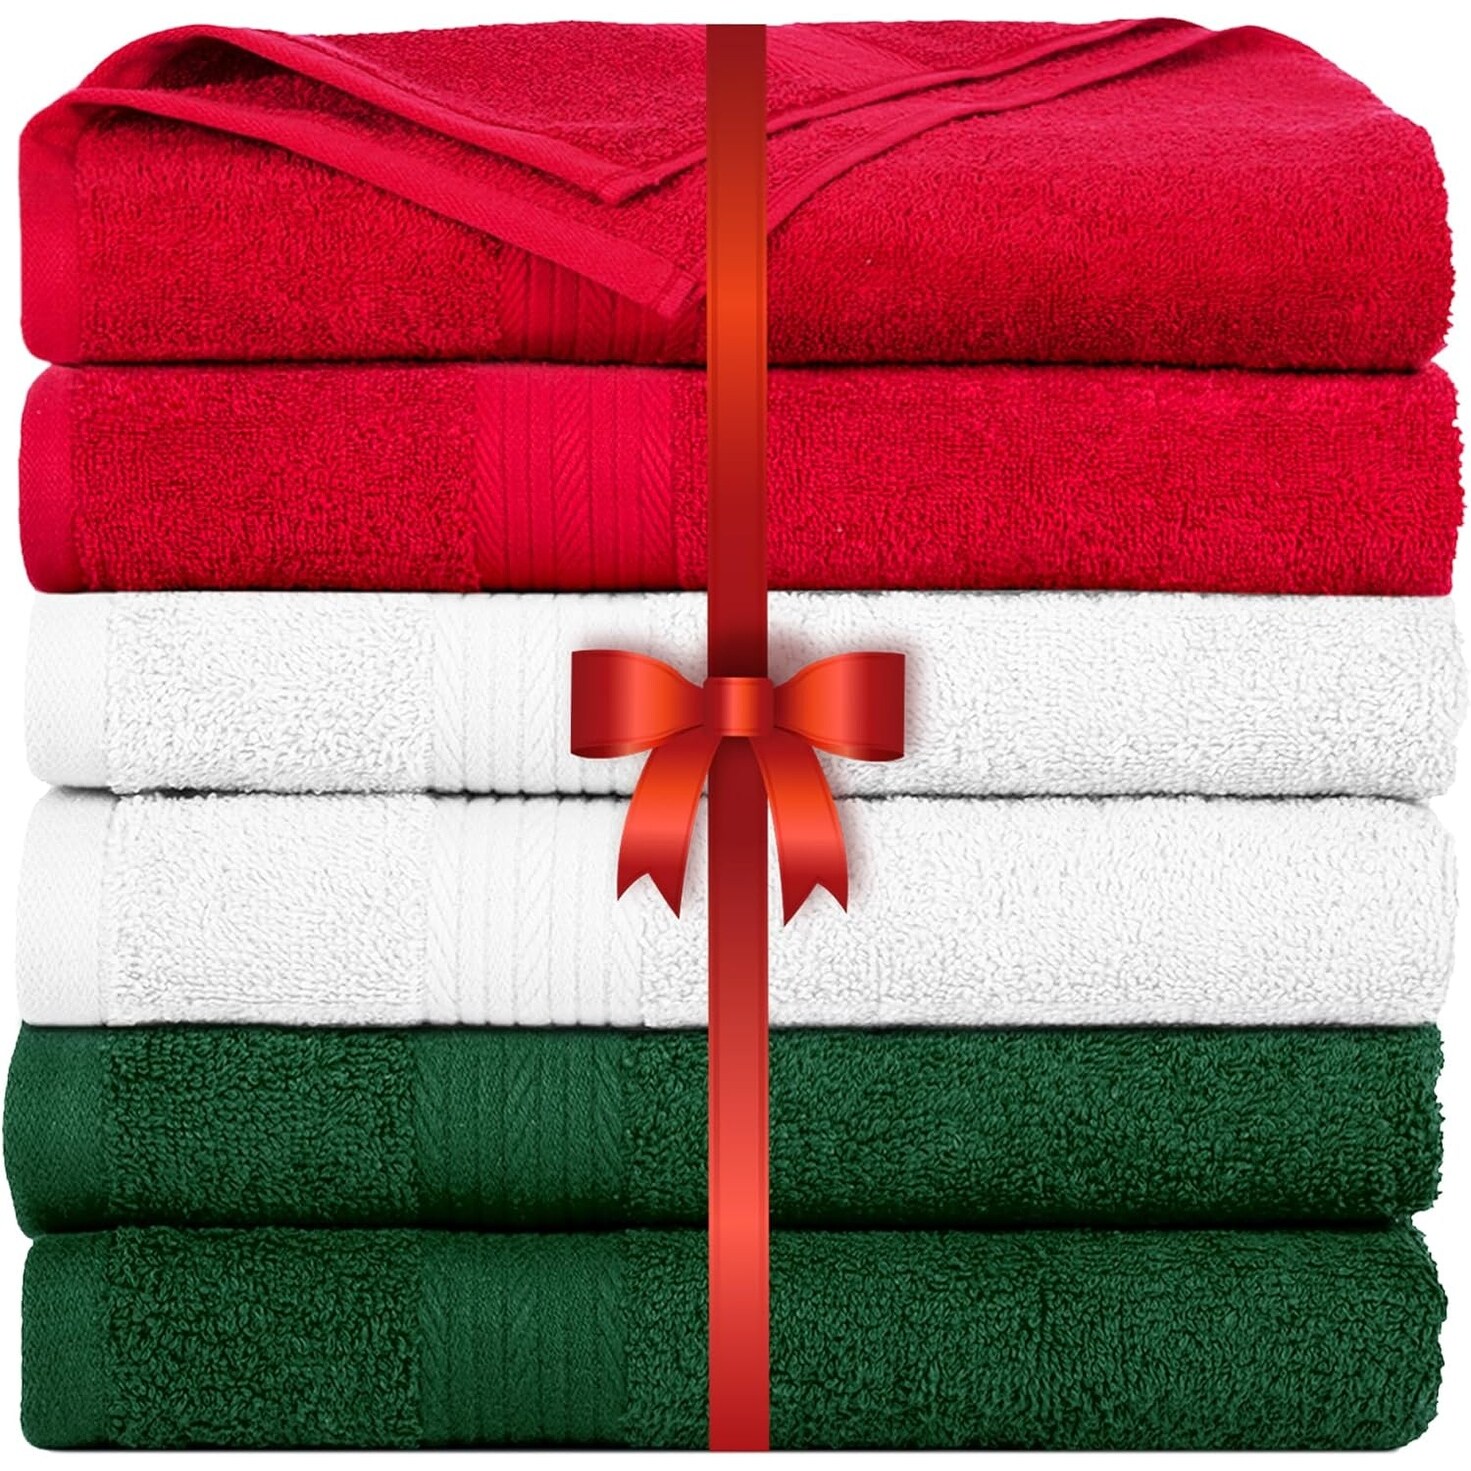 https://ak1.ostkcdn.com/images/products/is/images/direct/5d2fb6b716a676f5598c345152b28c616bbeee6a/Superior-Cotton-600-GSM-Hand-Towels-18x28-Inch-by-Ample-Decor.jpg